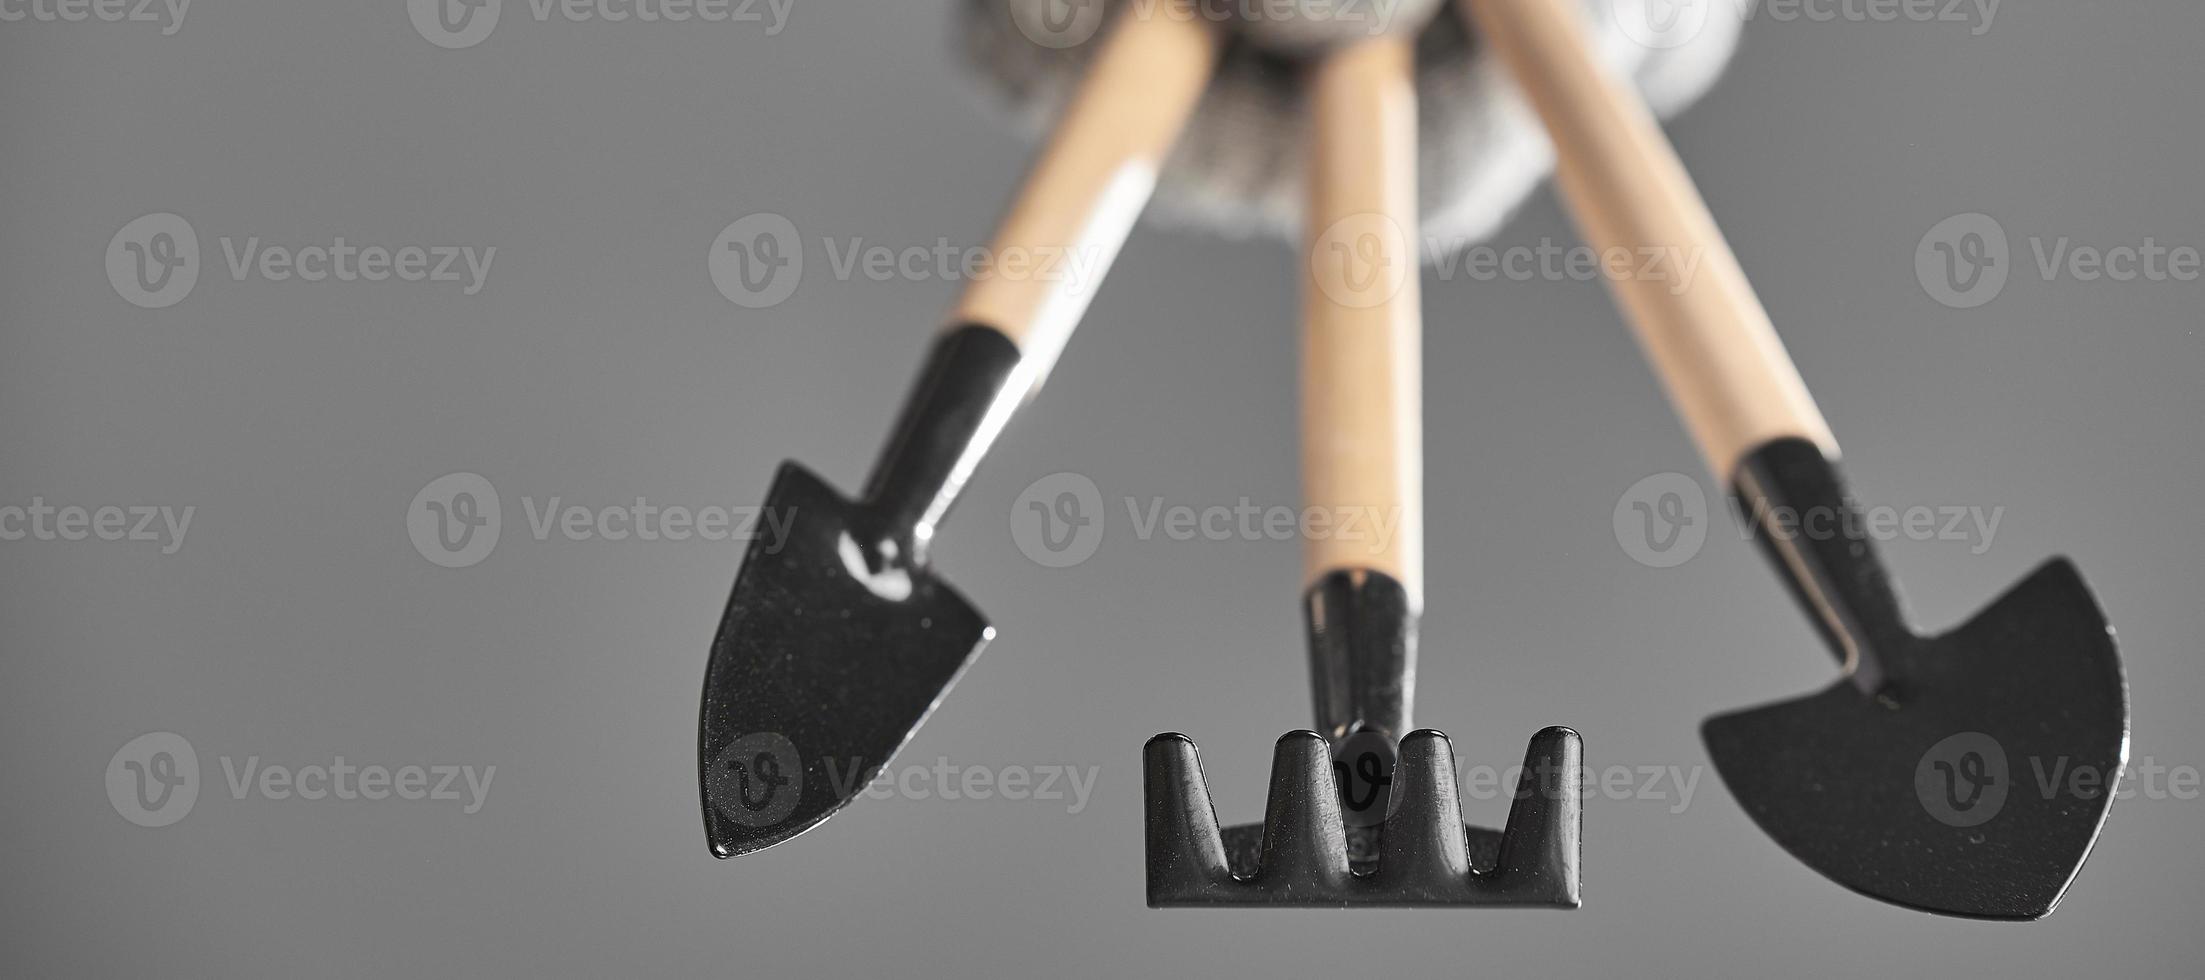 Hand in a glove holding gardening tools isolated on gray background. Photo with copy space.